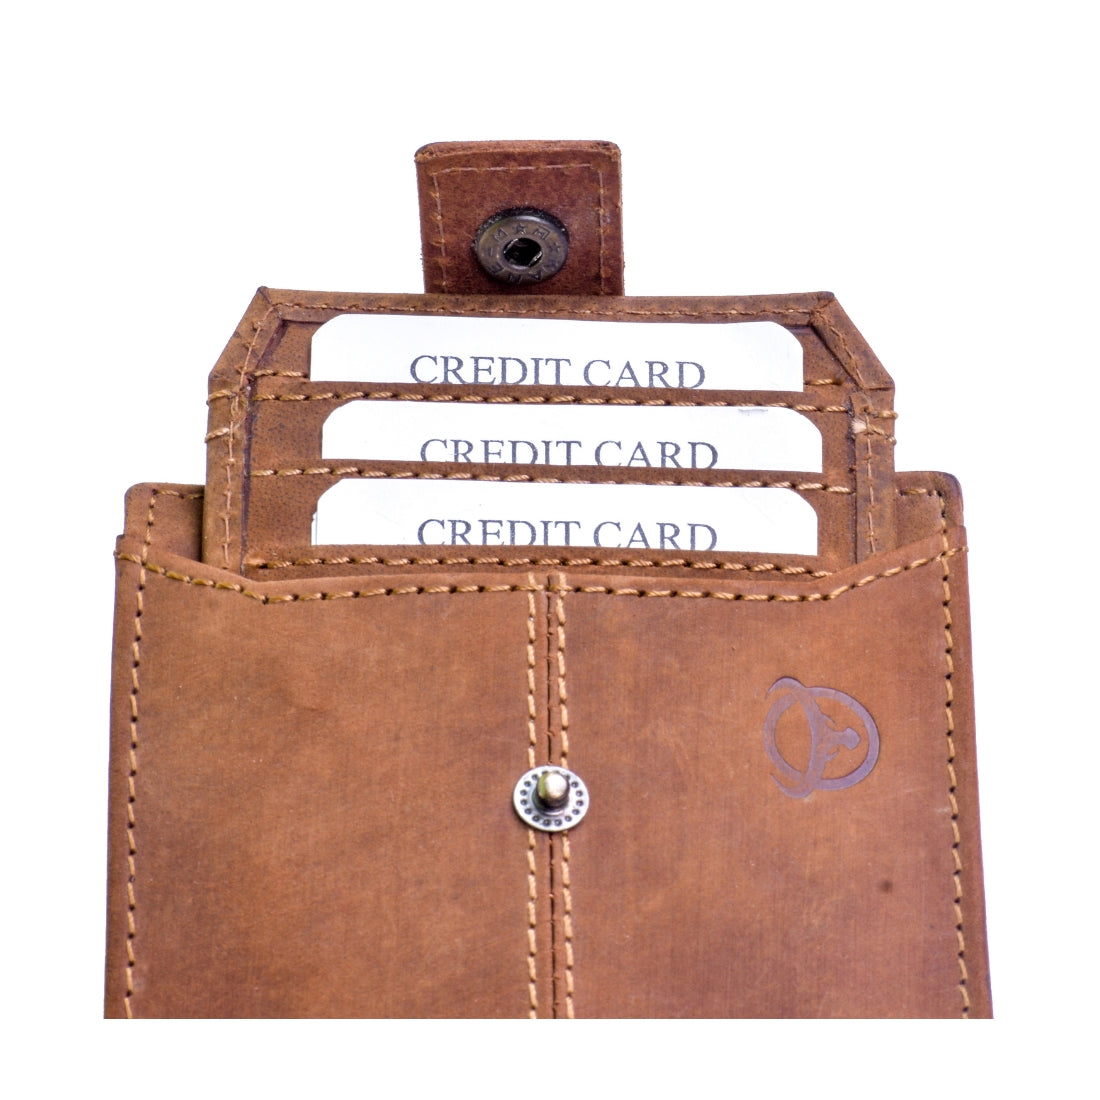 Cooper Allan Leather Hunter Wallet .12 Credit Card Slots . 1 Zipper Compartment : RFID